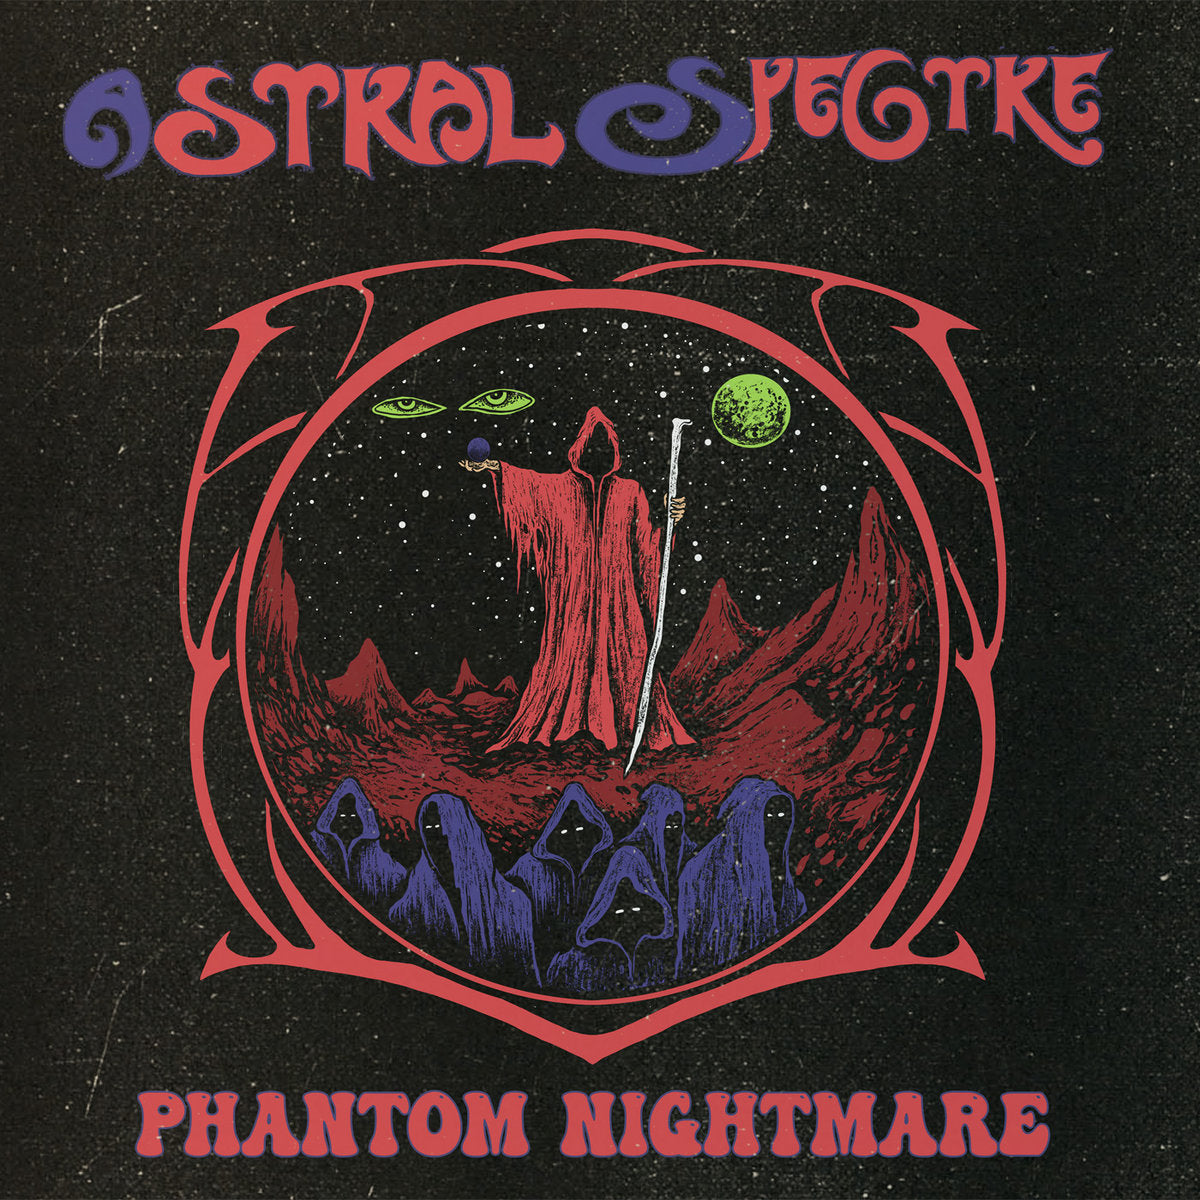 [SOLD OUT] ASTRAL SPECTRE "Phantom Nightmare / The Oath is Broken" double CD (2xCD digipak, lim.500)